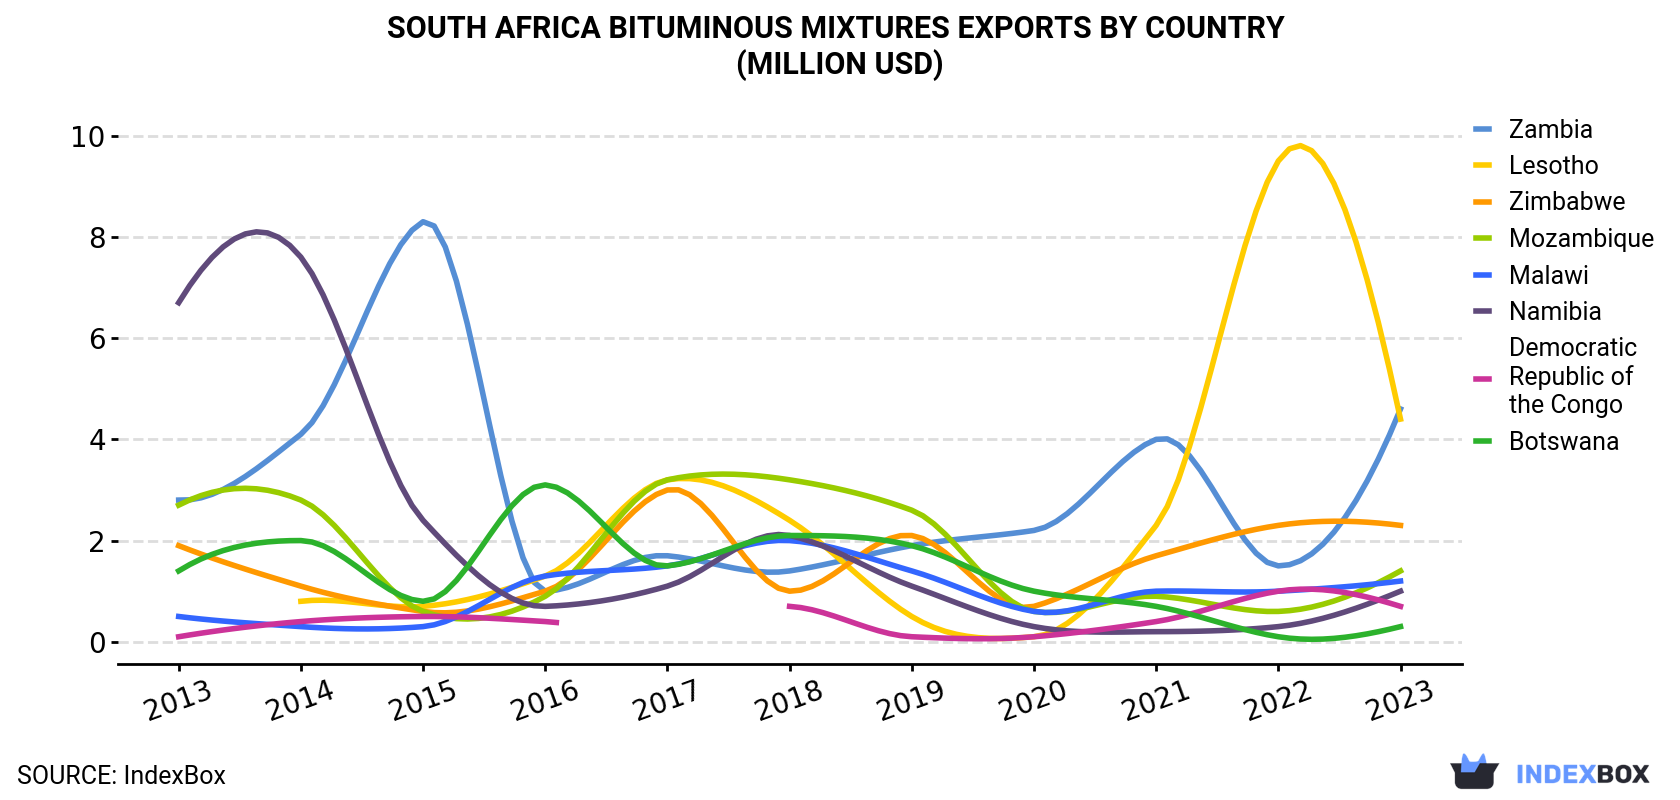 South Africa Bituminous Mixtures Exports By Country (Million USD)